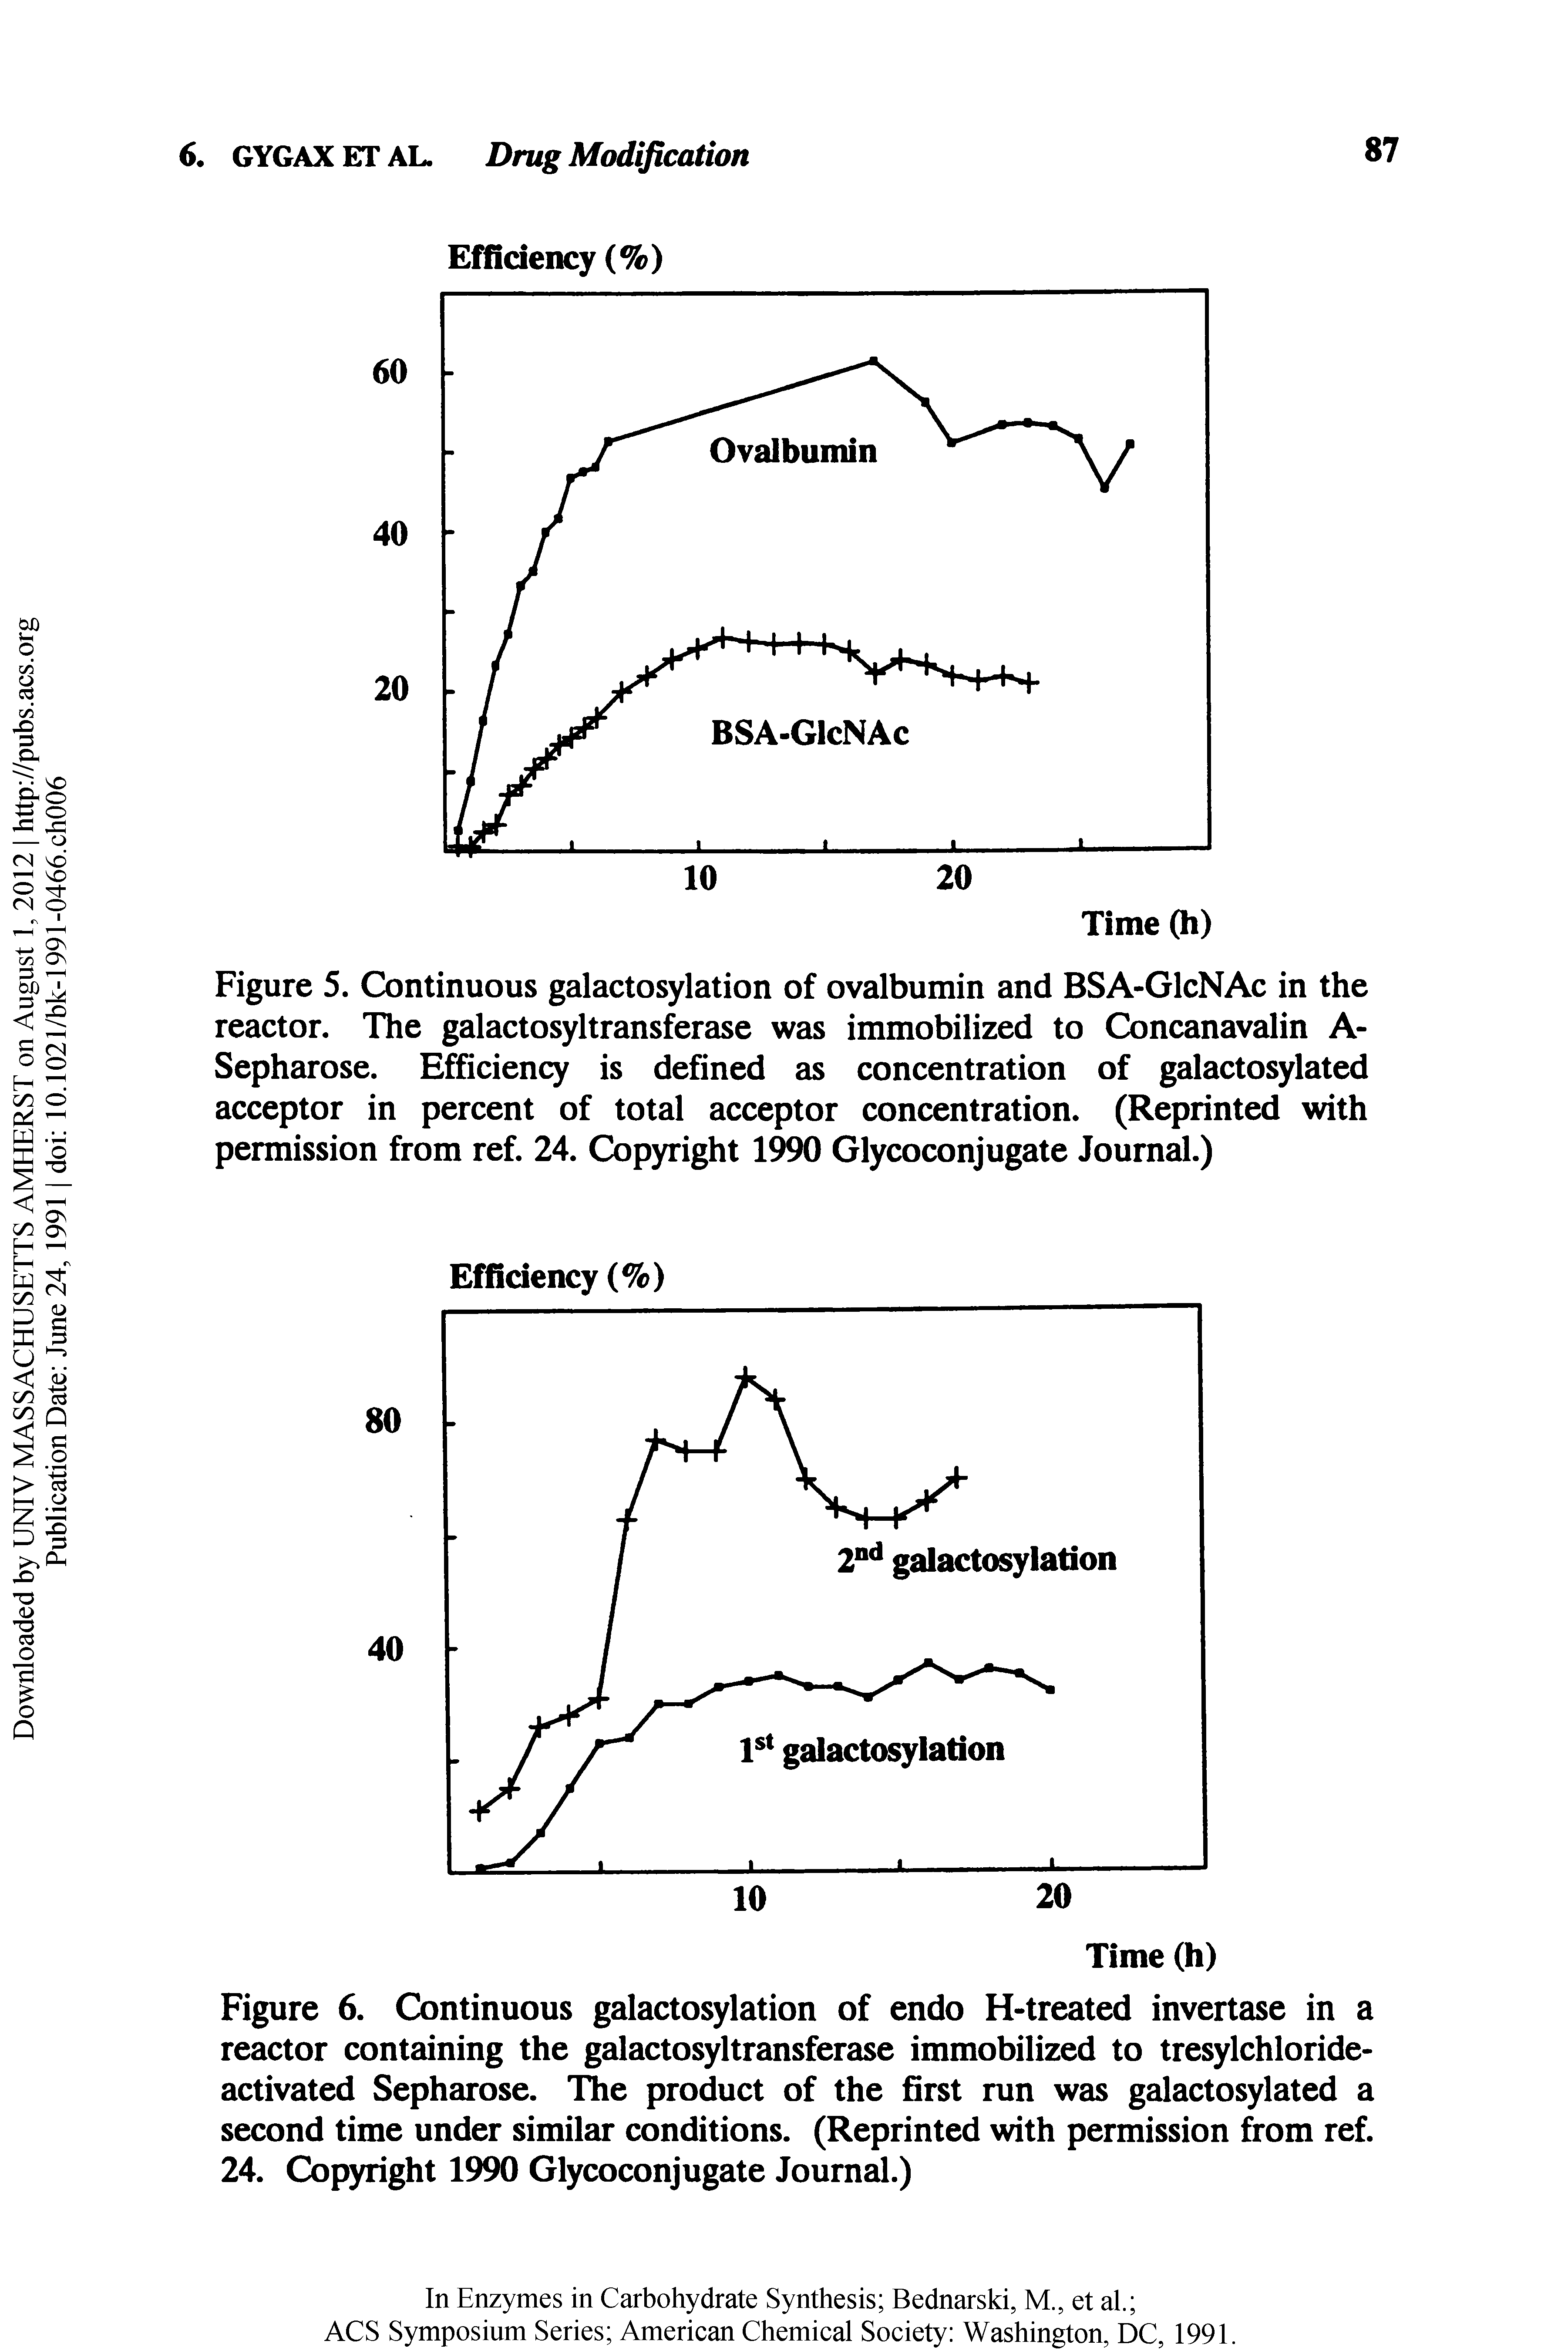 Figure 5. Continuous galactosylation of ovalbumin and BSA-GlcNAc in the reactor. The galactosyltransferase was immobilized to Concanavalin A-Sepharose. Efficiency is defined as concentration of galactosylated acceptor in percent of total acceptor concentration. (Reprinted with permission from ref. 24. Copyright 1990 Glycoconjugate Journal.)...